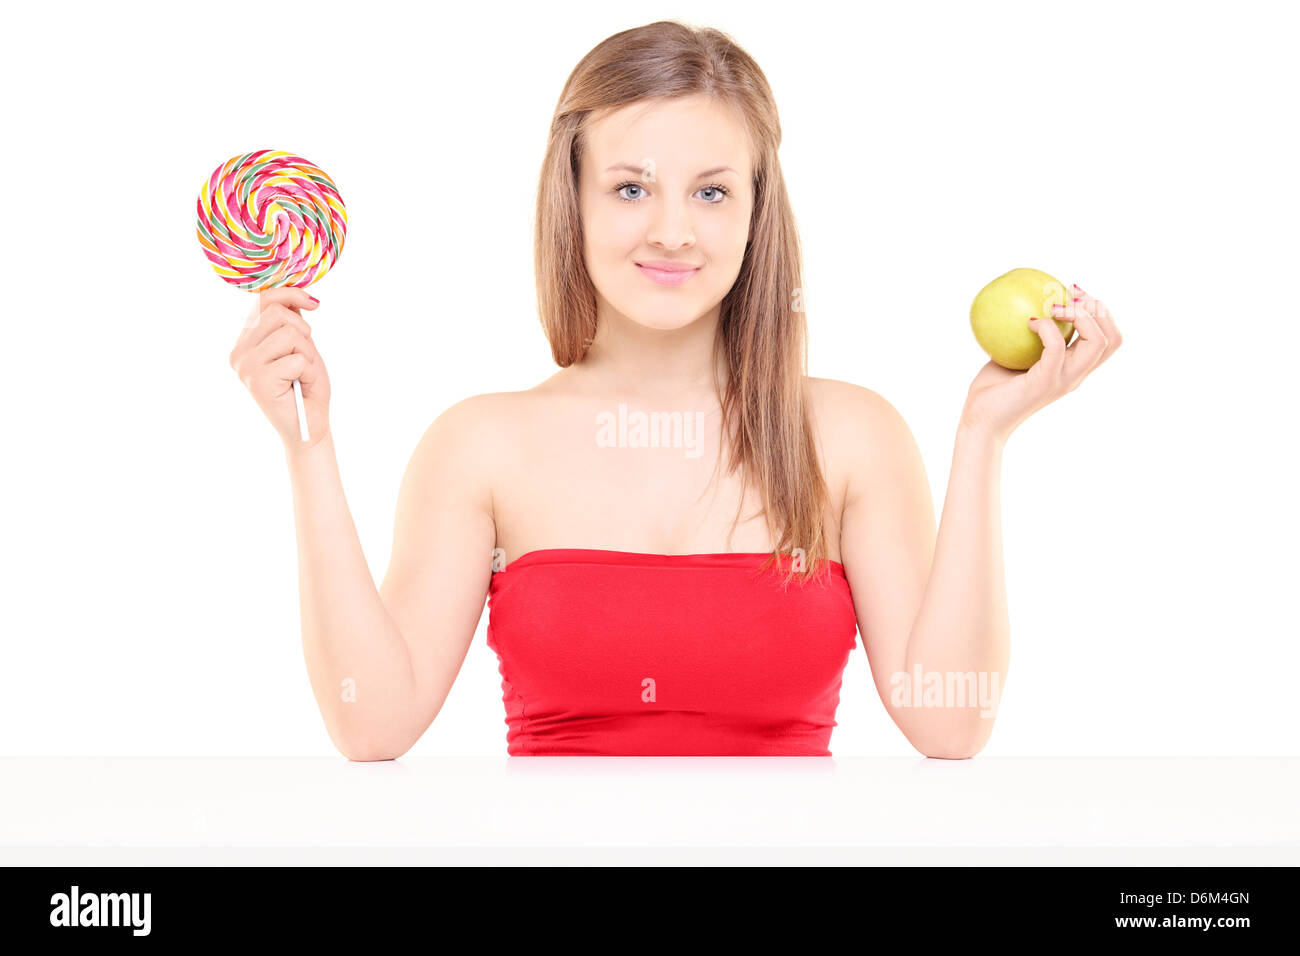 Pretty young girl holding a lollipop and an apple, isolated on white background Stock Photo